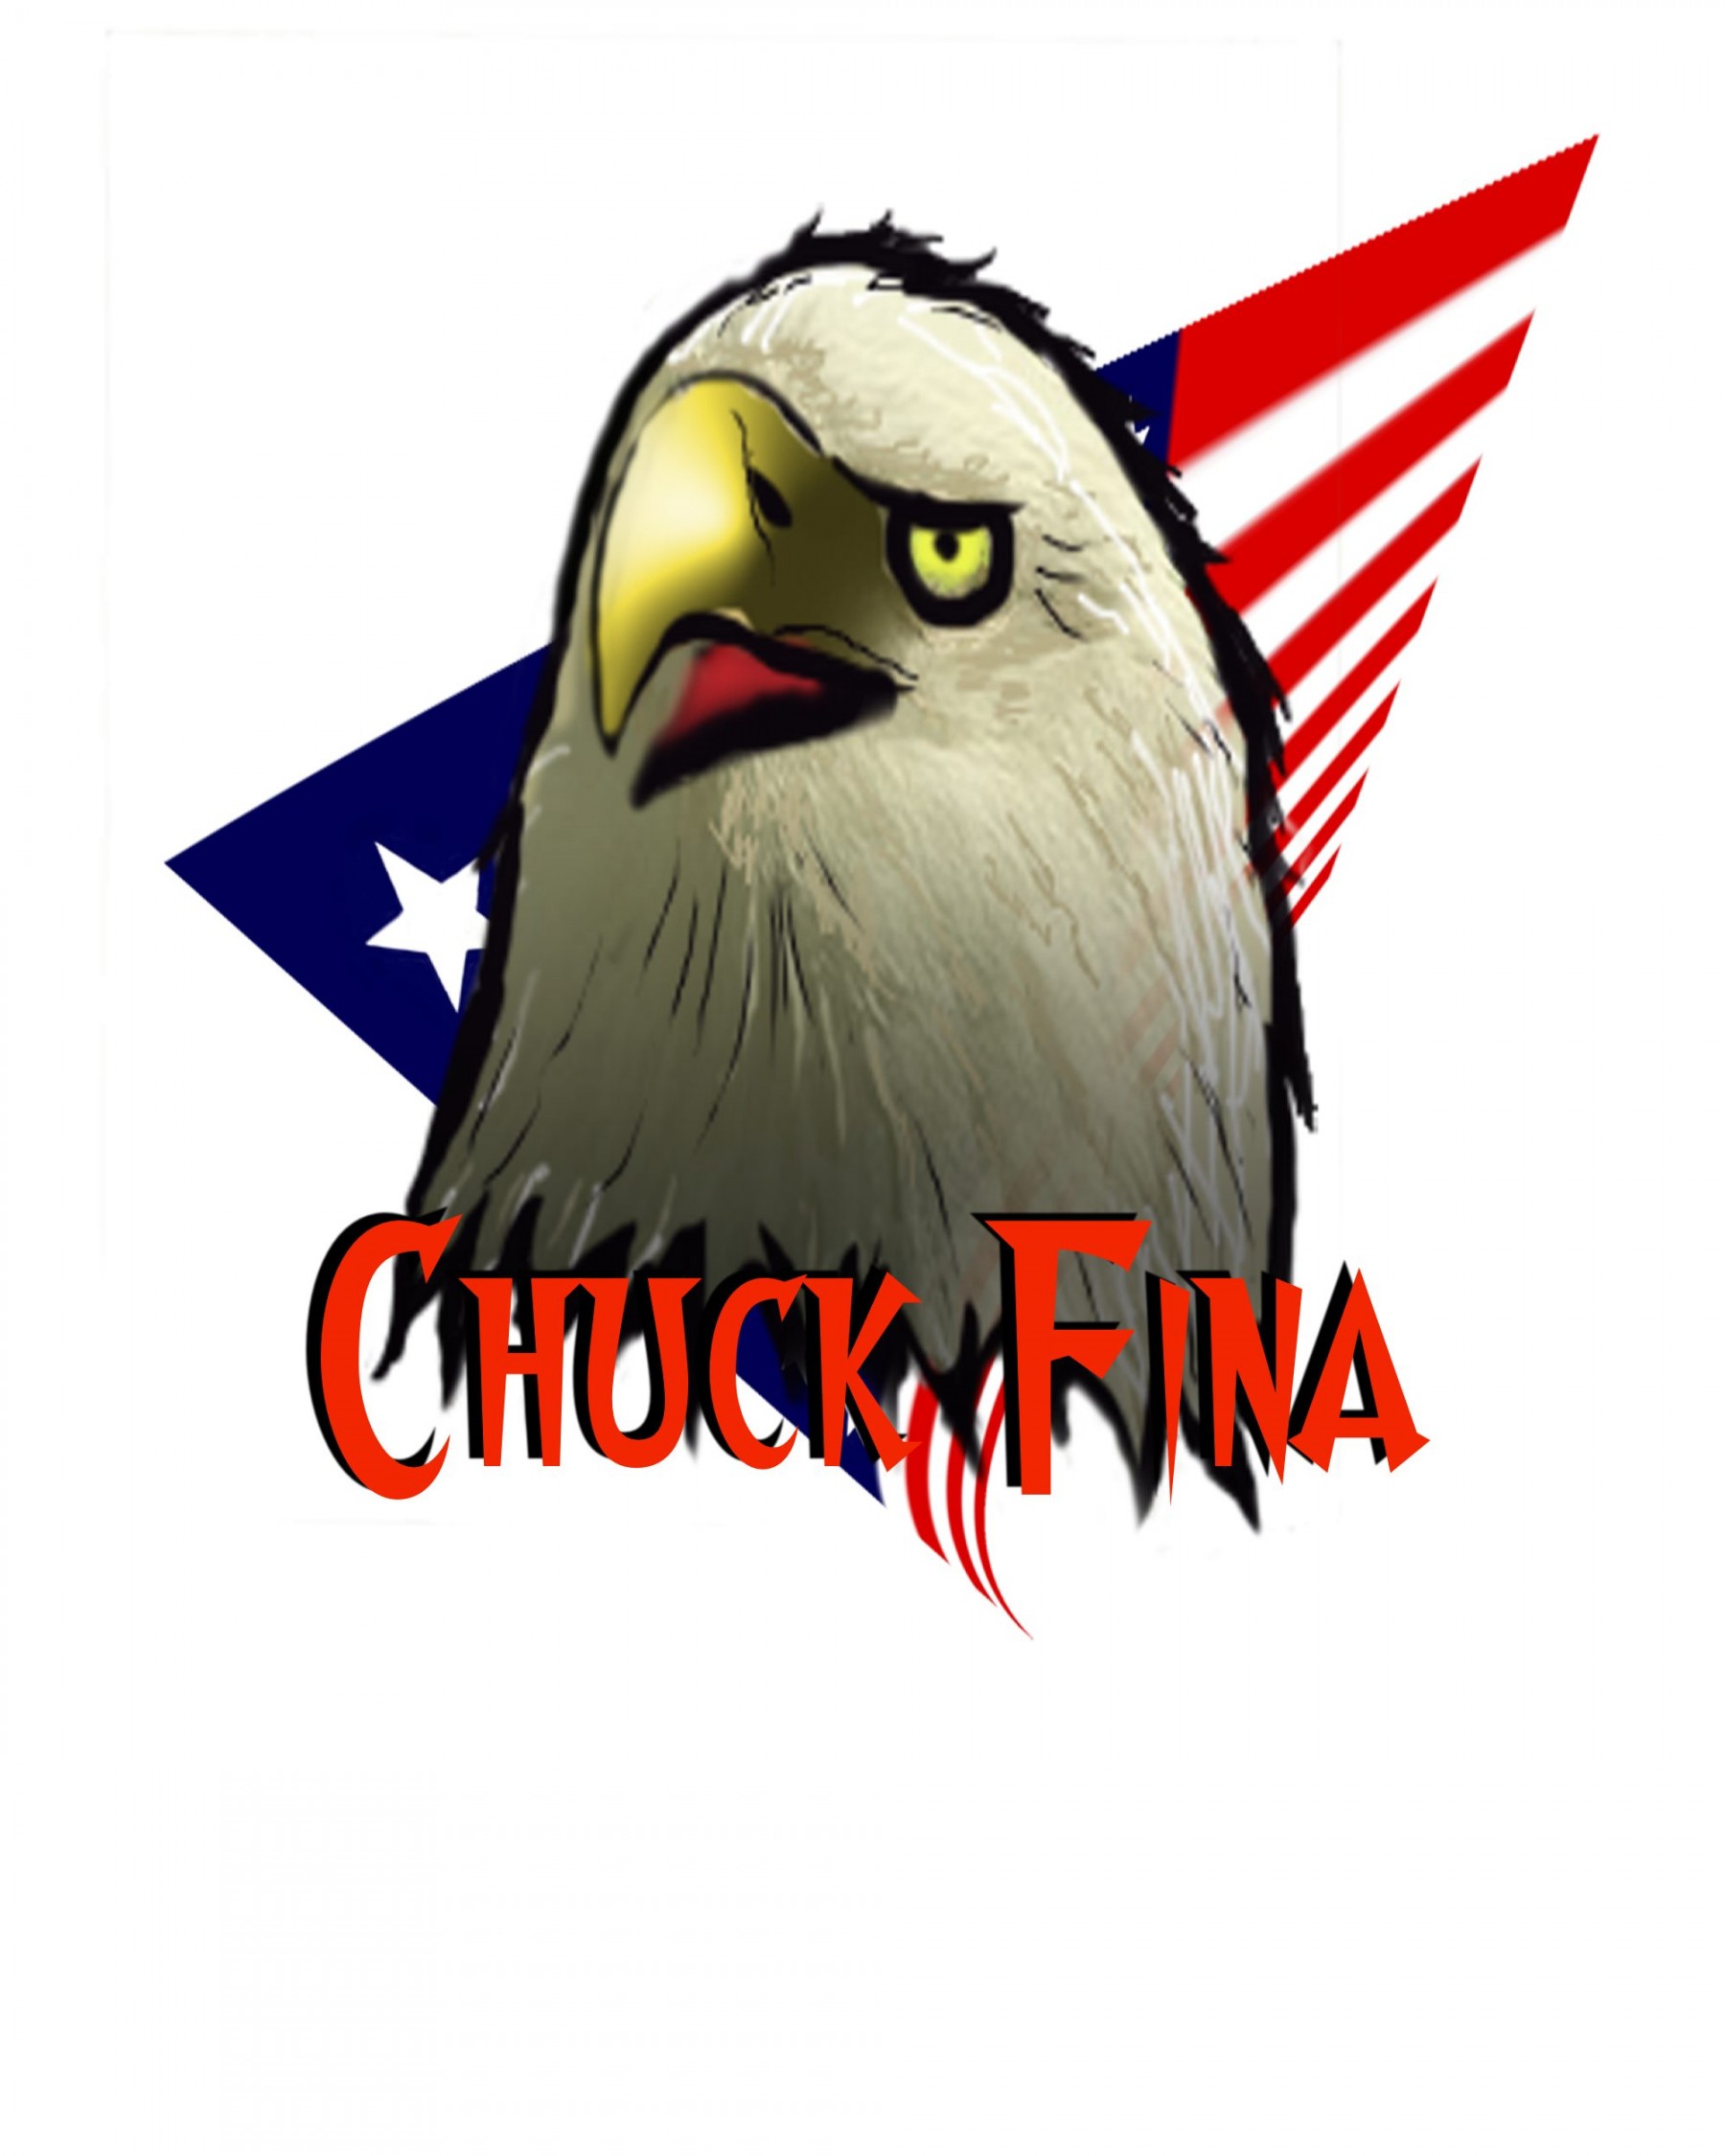 Sick of (or From) Junk from China? Chuck Fina!